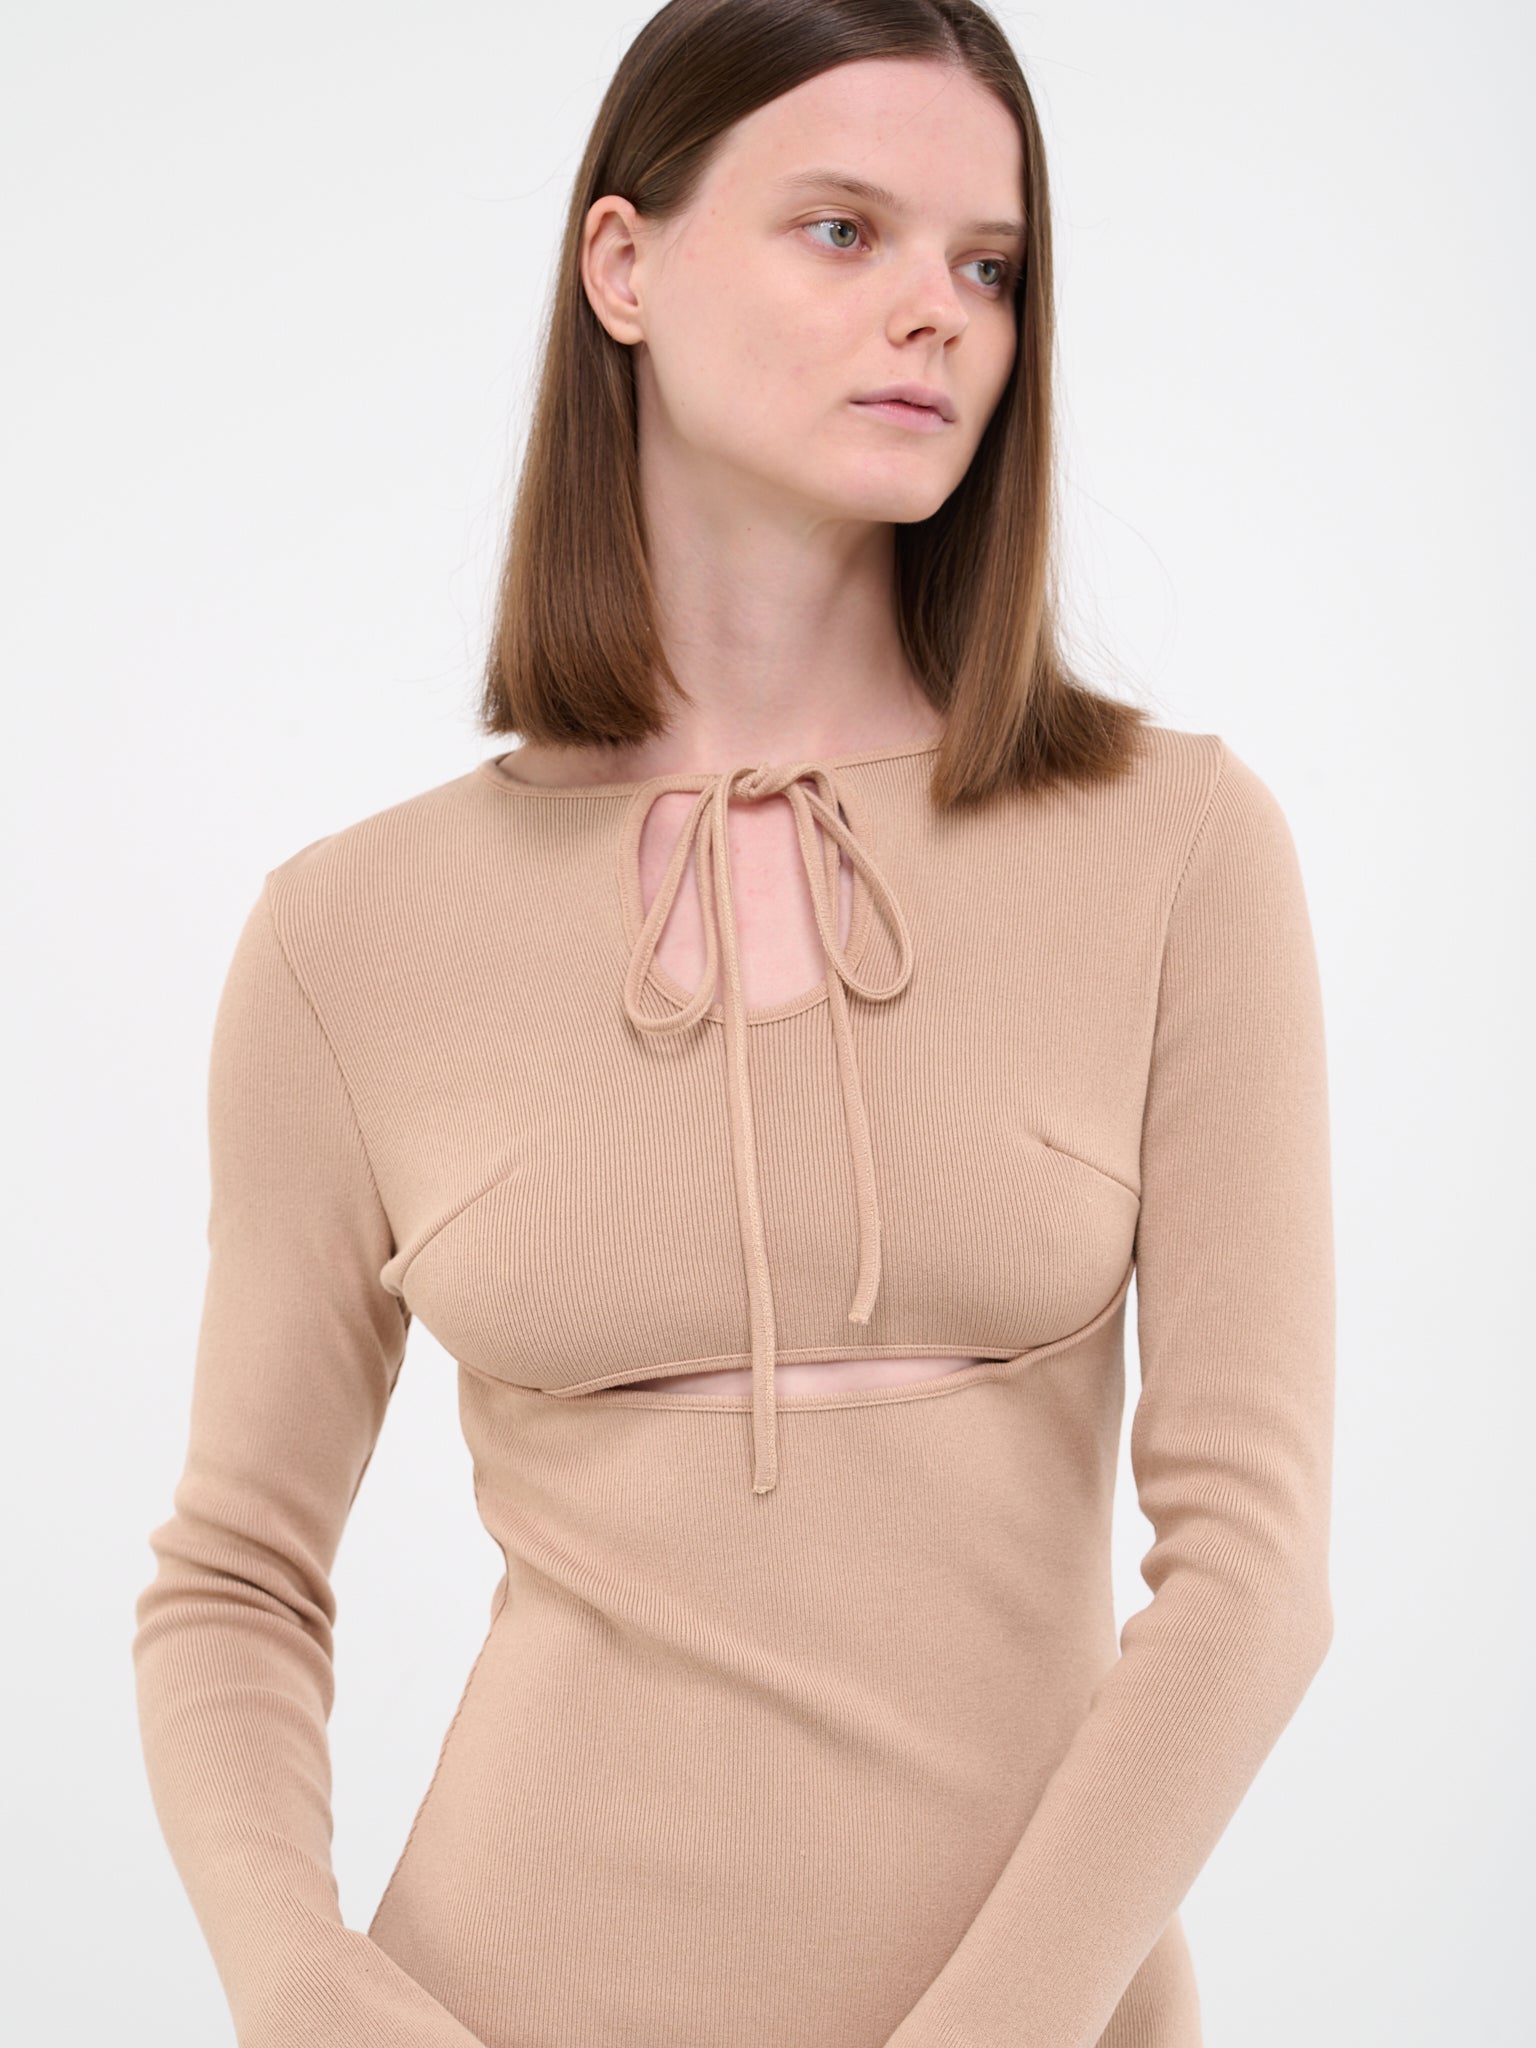 Cut-Out Knit Dress (DR21947268-0475-001-NUDE)